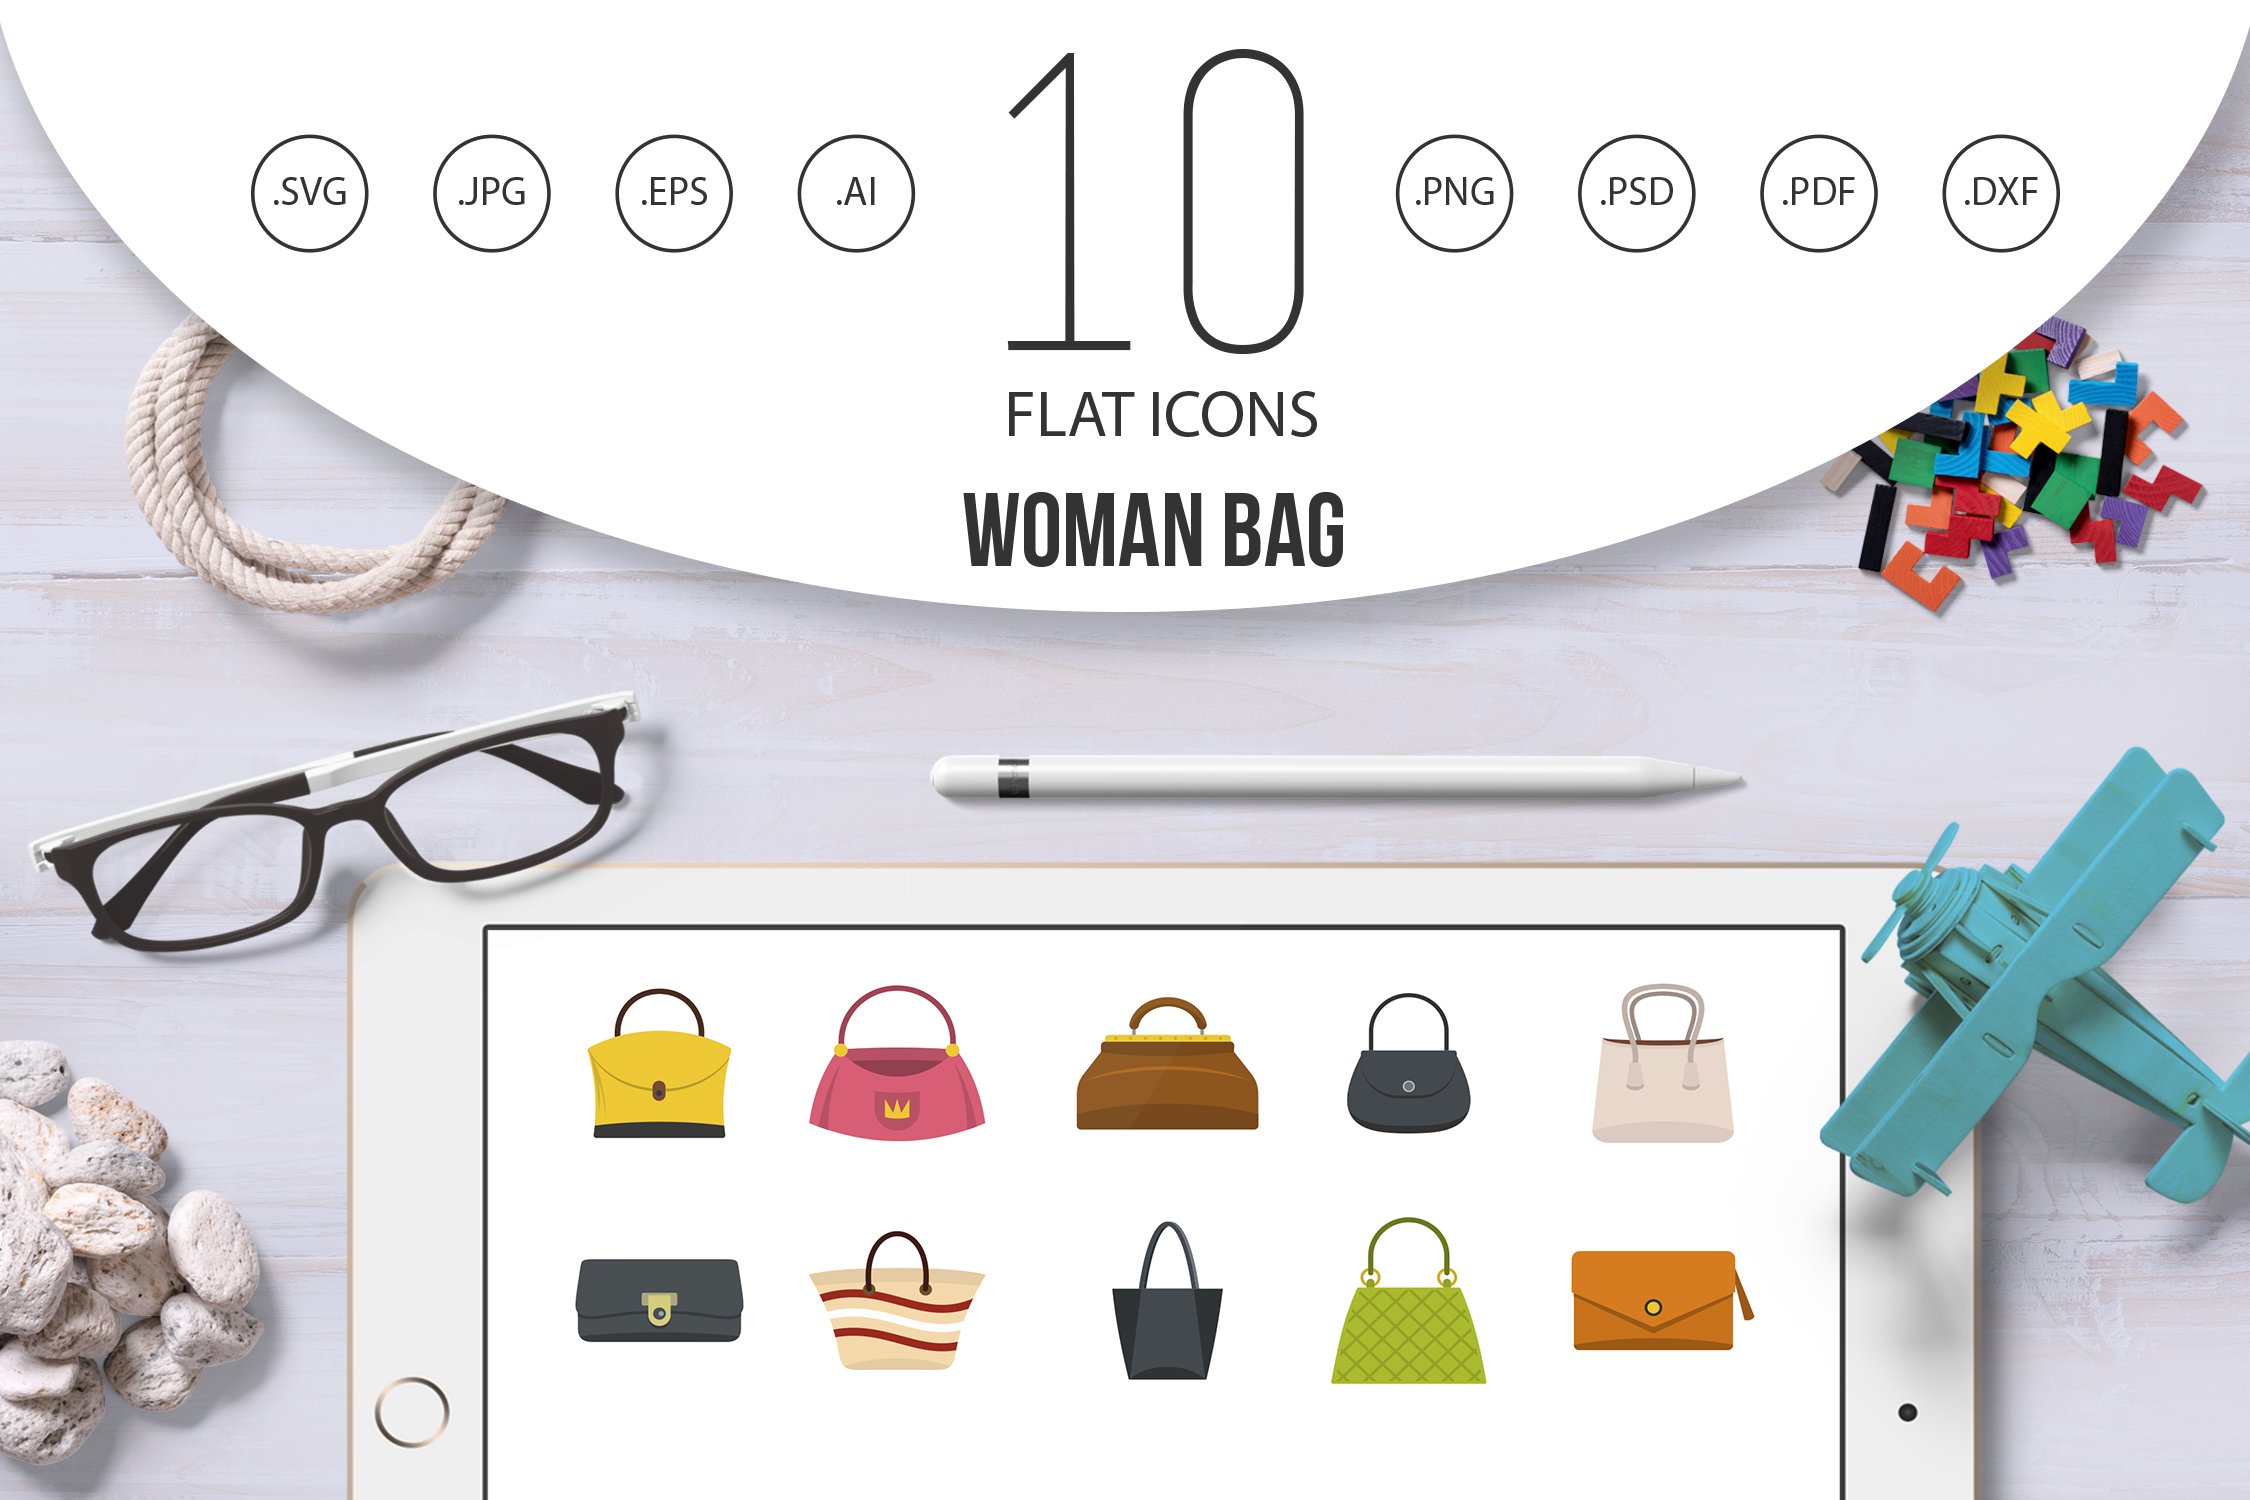 Woman bag icon set, flat style cover image.